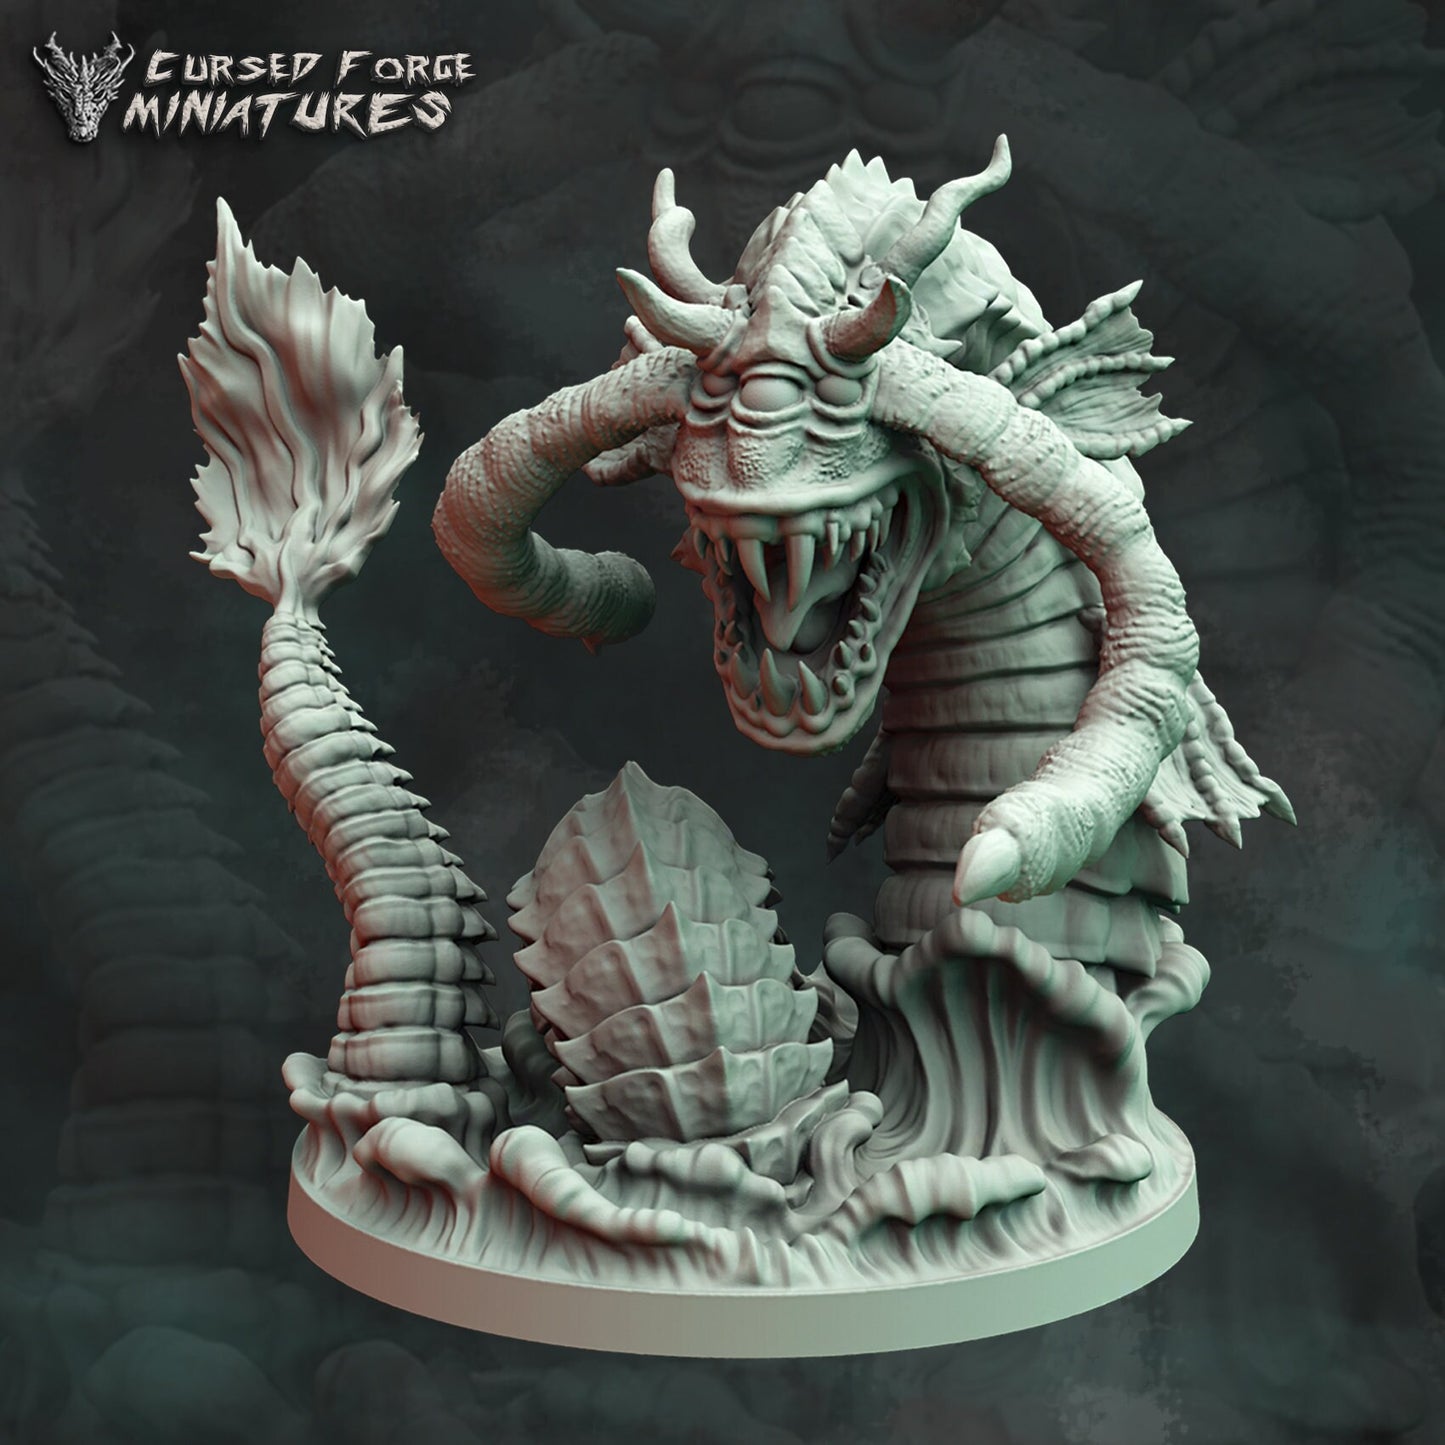 ABOLETH, by Cursed Forge Miniatures // 3D Print on Demand / D&D / Pathfinder / RPG